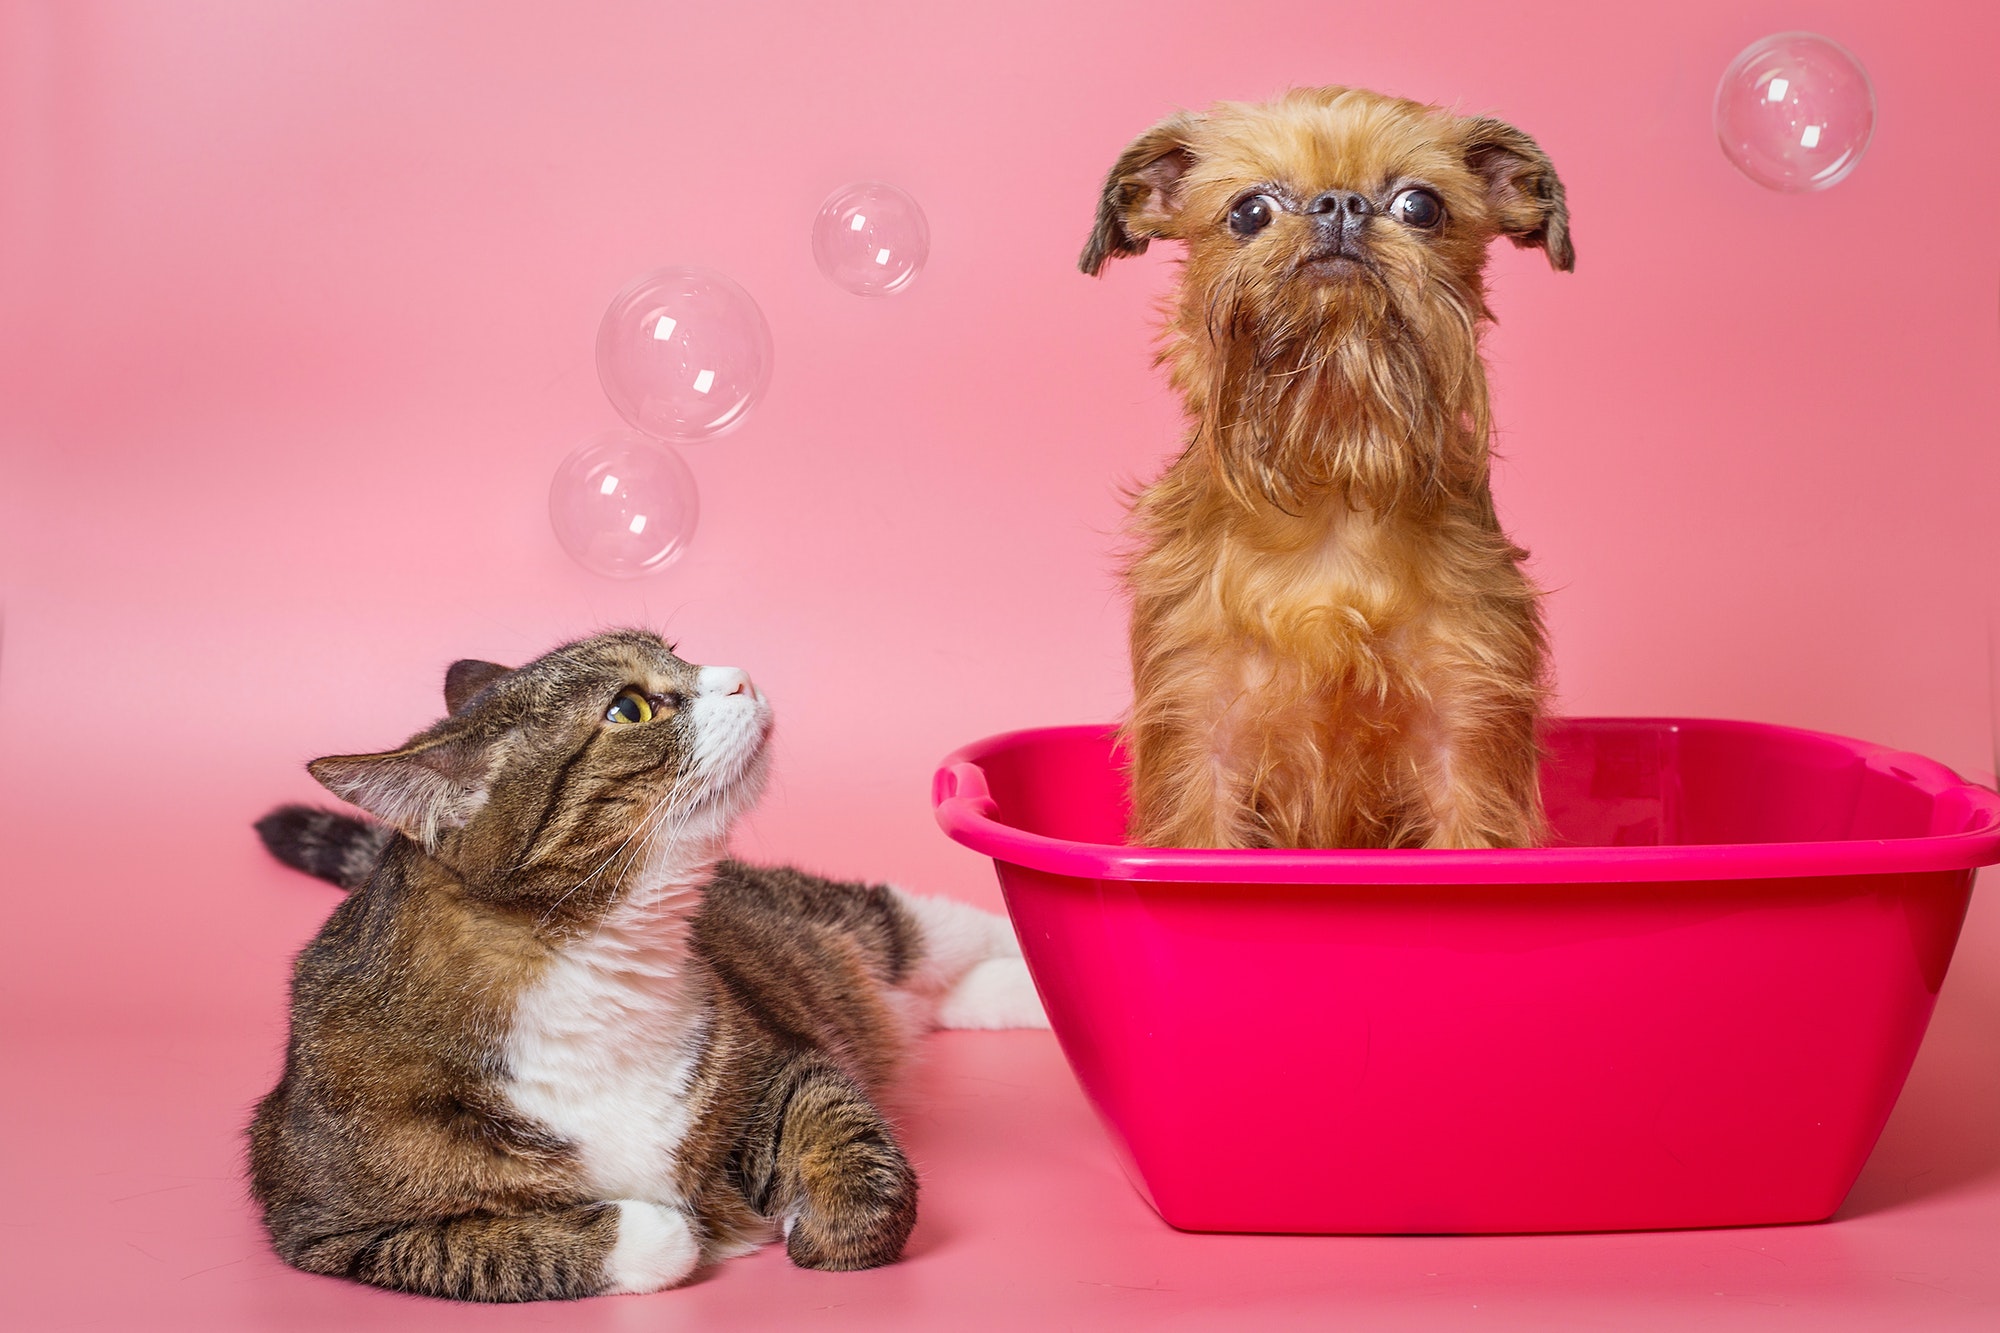 Dog and cat wash in a pink basin